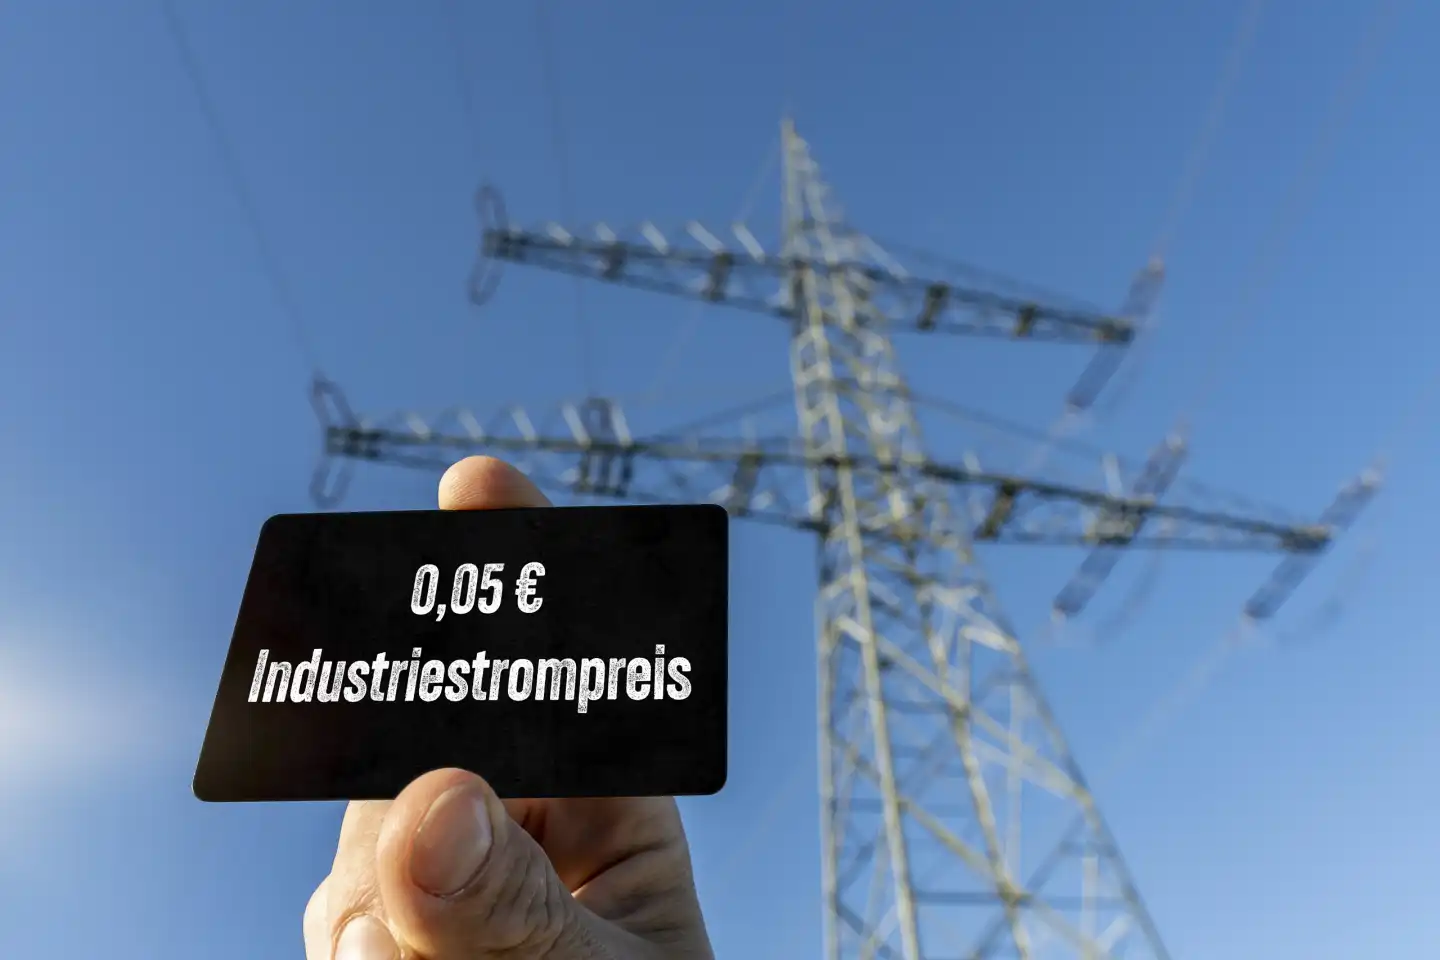 Augsburg, Bavaria, Germany - August 7, 2023: Hand holding plaque in front of a high voltage power pole with the inscription: Industrial electricity price 5 cents PHOTOMONTAGE